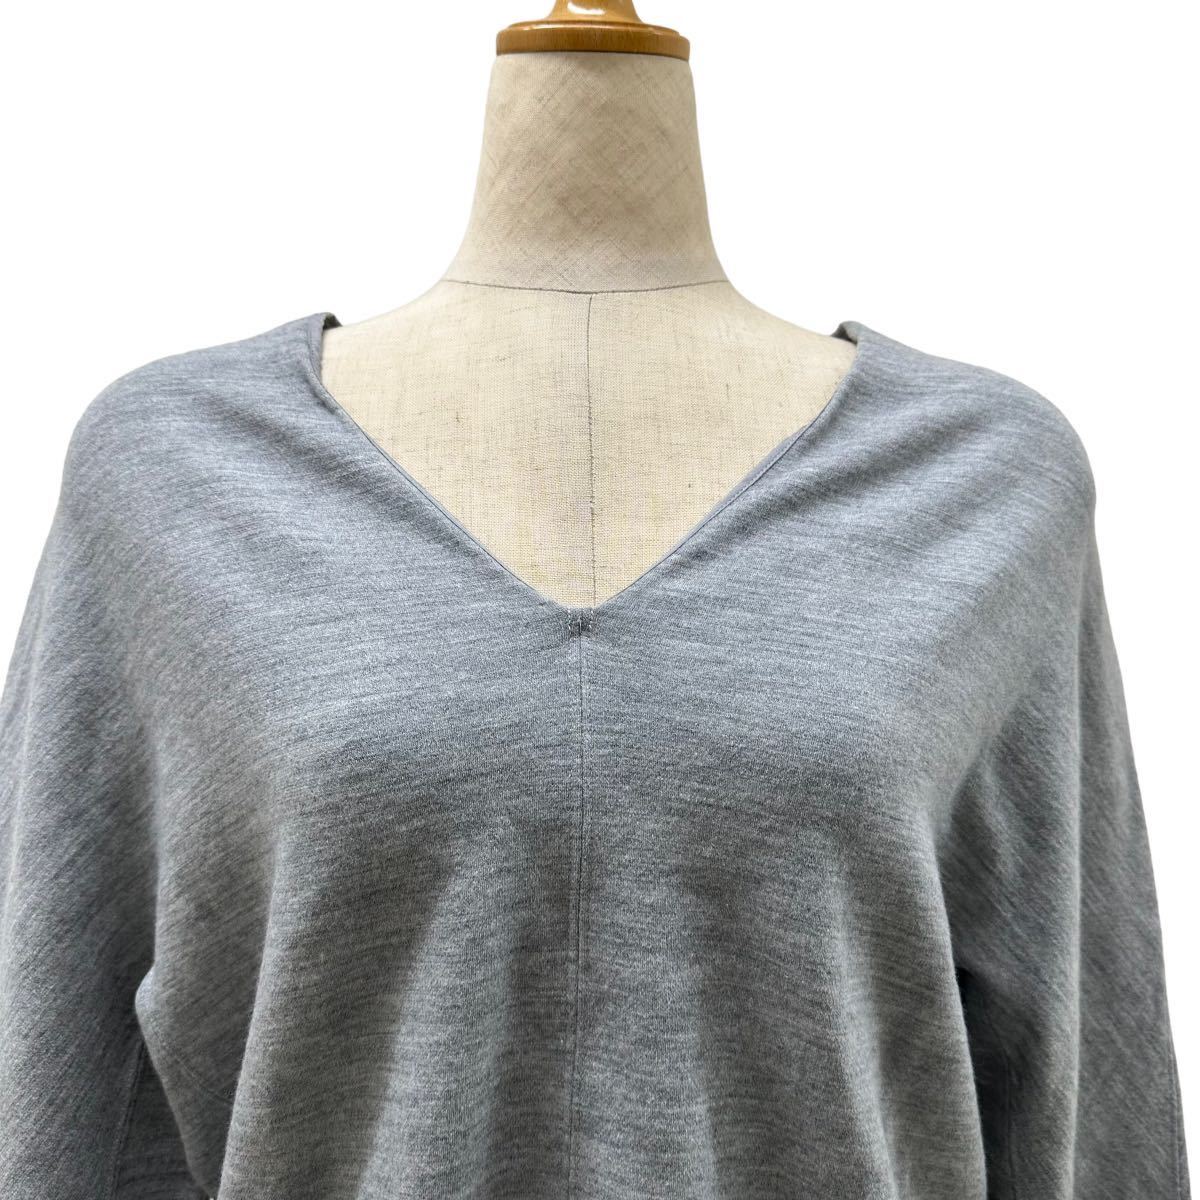 a154N MOGA Moga tops gray series size2 made in Japan usually using V neck 